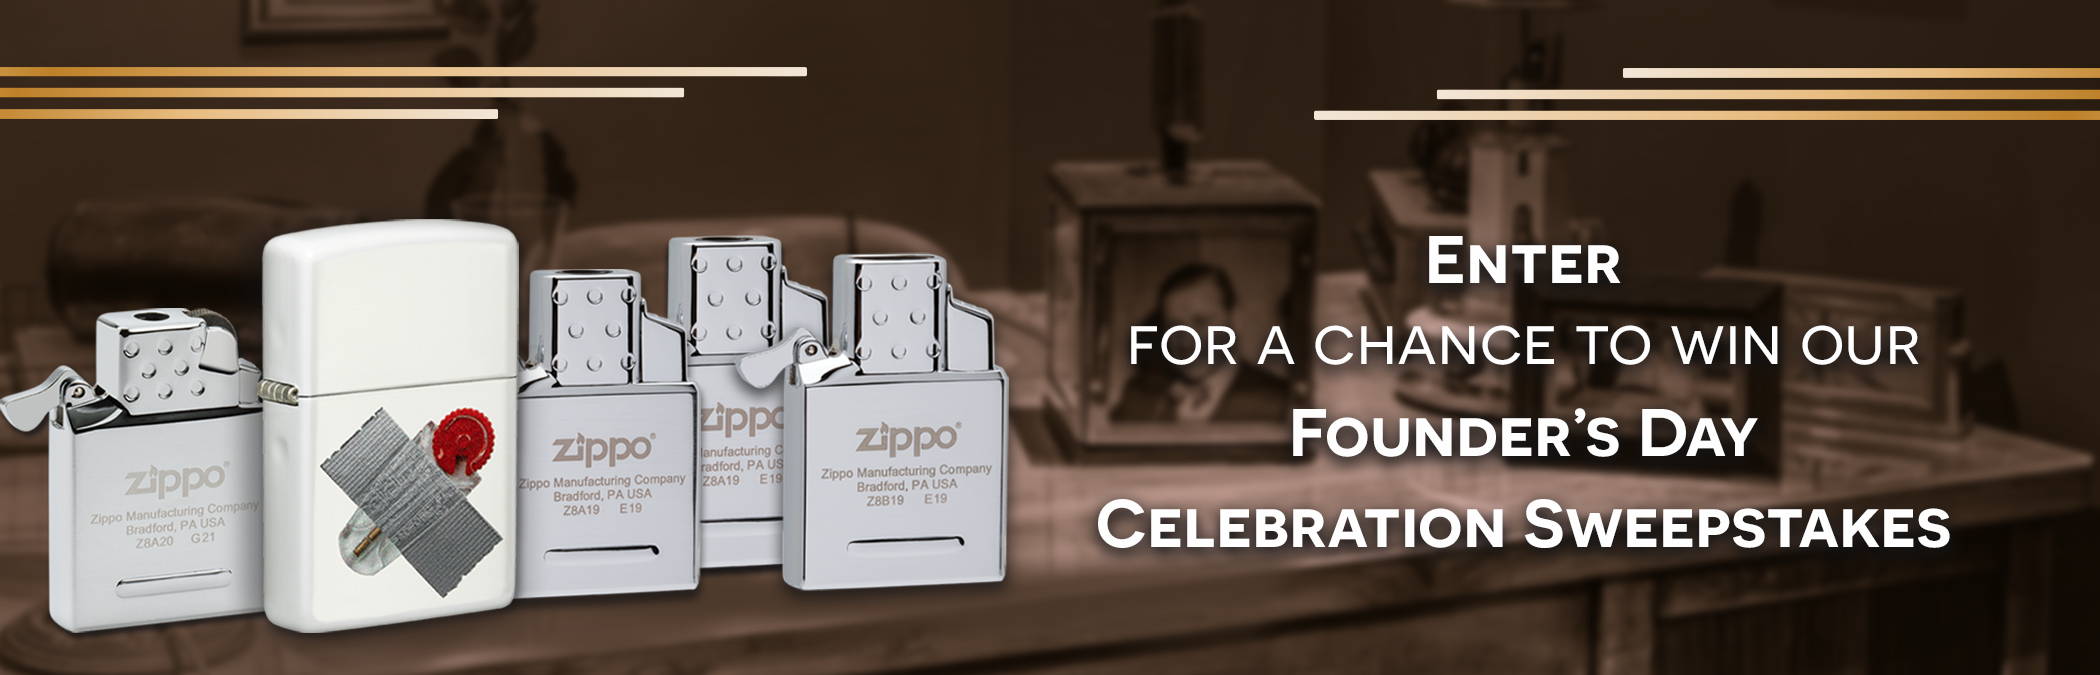 Enter For A Chance To Win Our Founder's Day Celebration Sweepstakes.